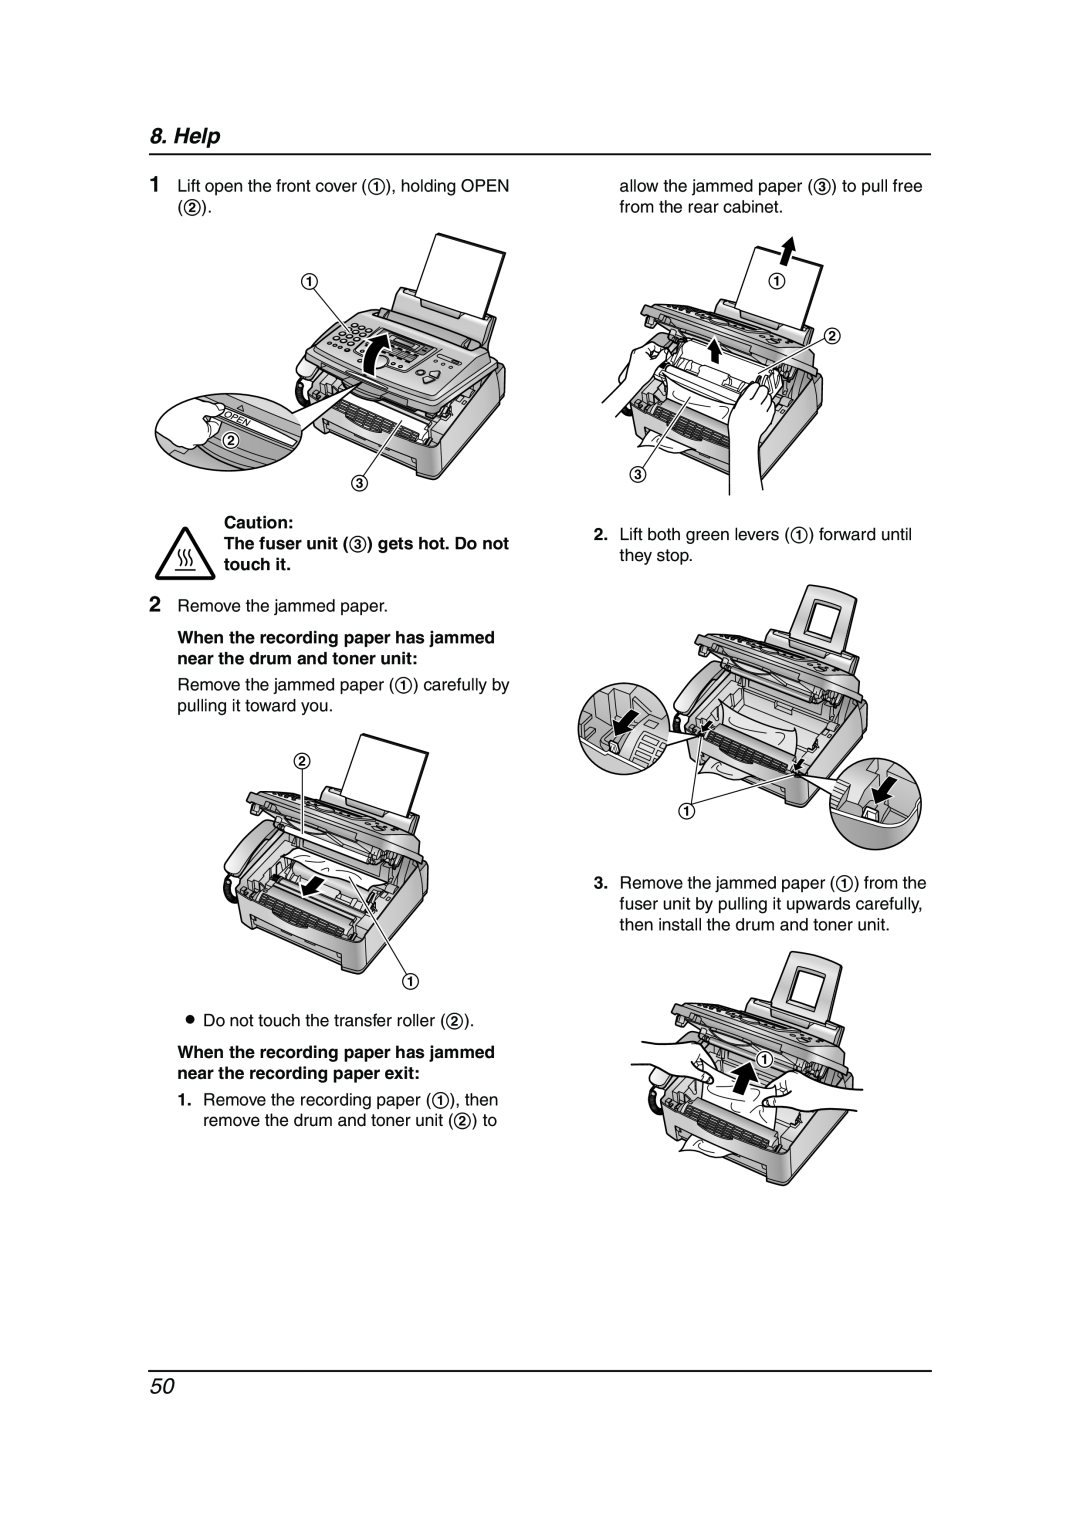 Panasonic KX-FL511AL manual Help, When the recording paper has jammed near the drum and toner unit 